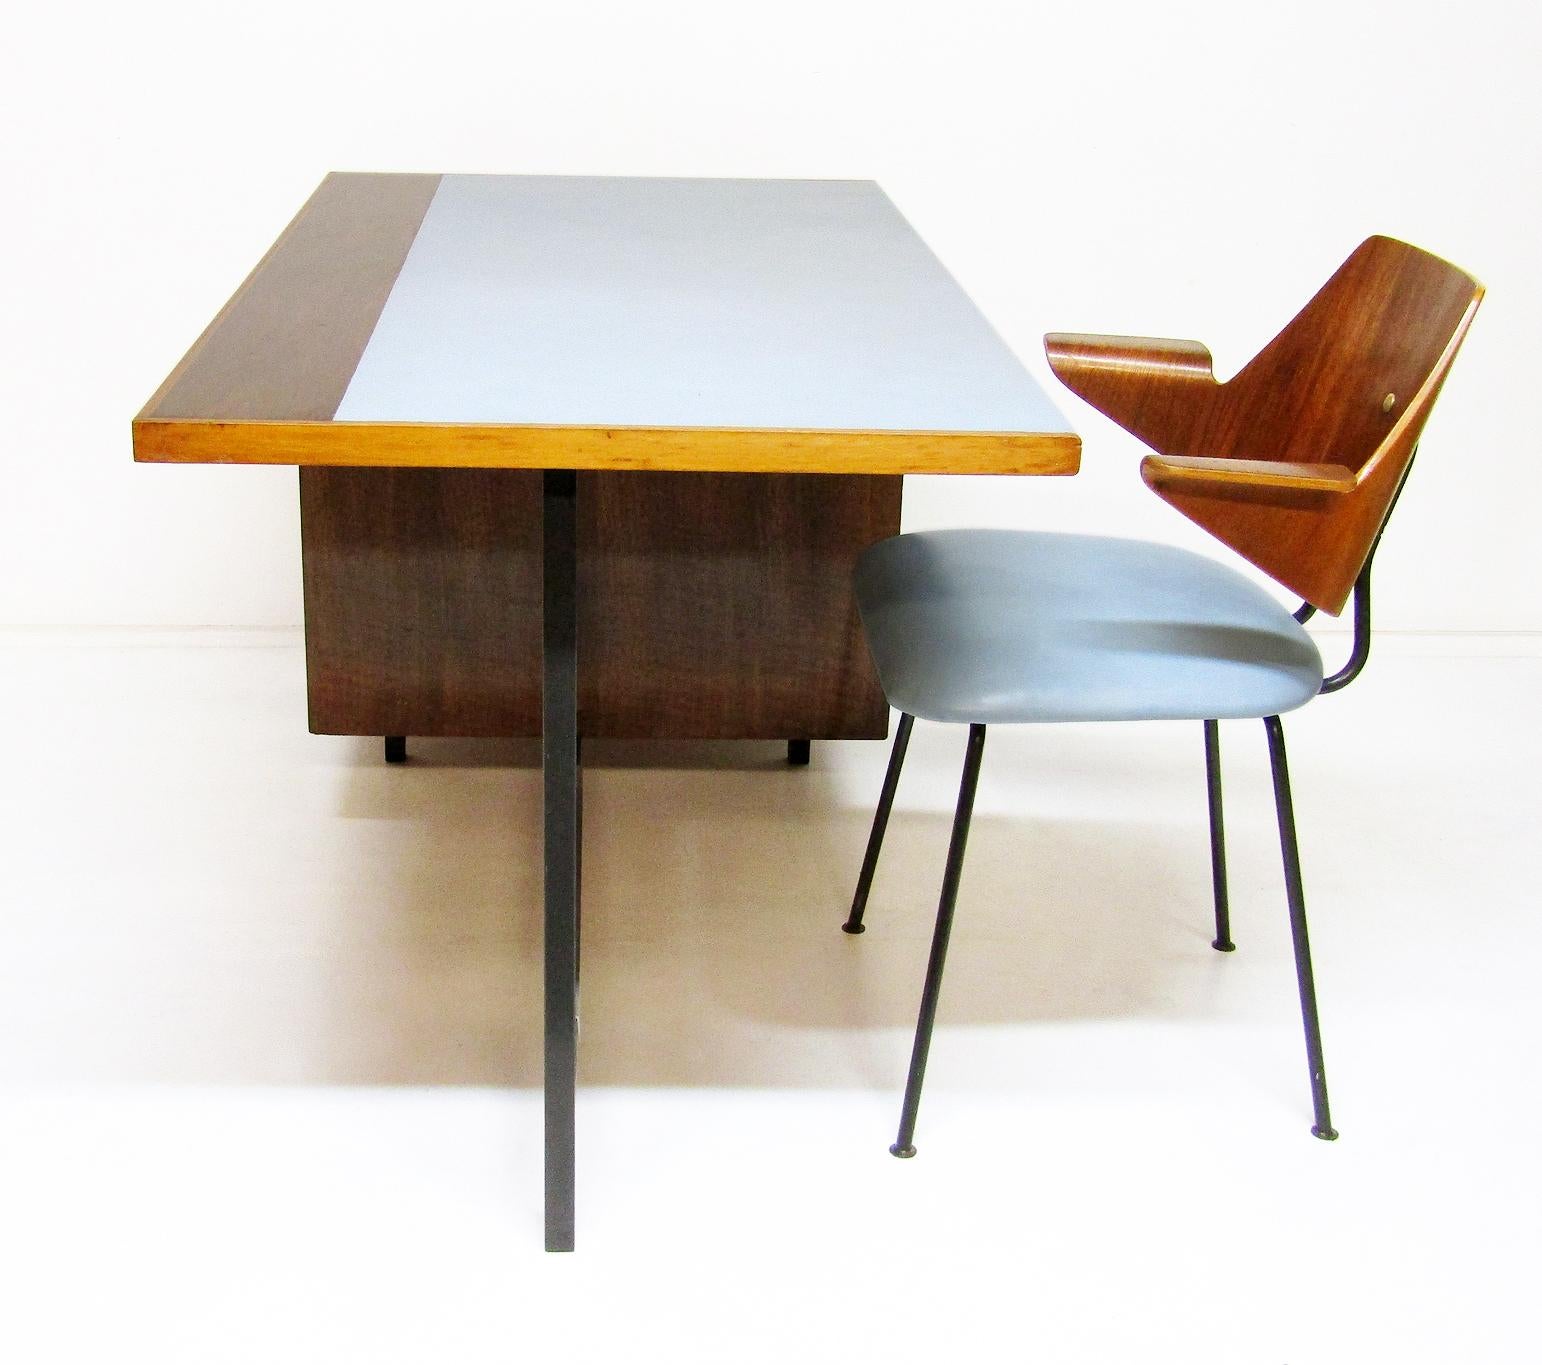 20th Century 1950s Modernist Desk & Chair Set in Walnut & Leather by Robin Day for Hille